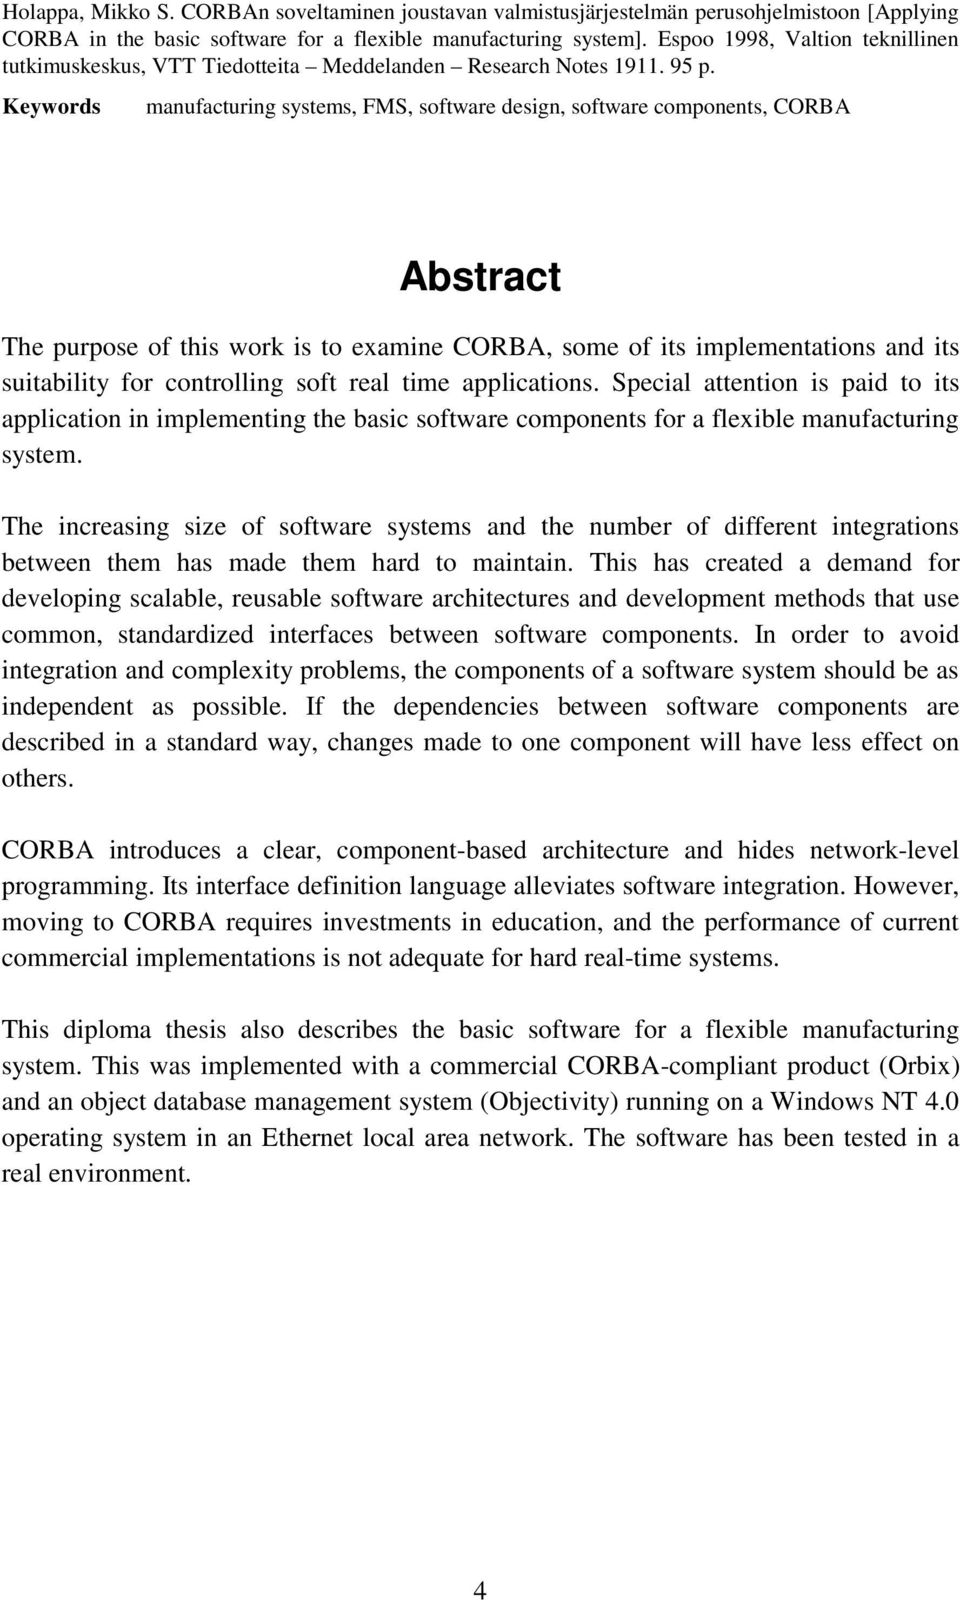 Keywords manufacturing systems, FMS, software design, software components, CORBA Abstract The purpose of this work is to examine CORBA, some of its implementations and its suitability for controlling